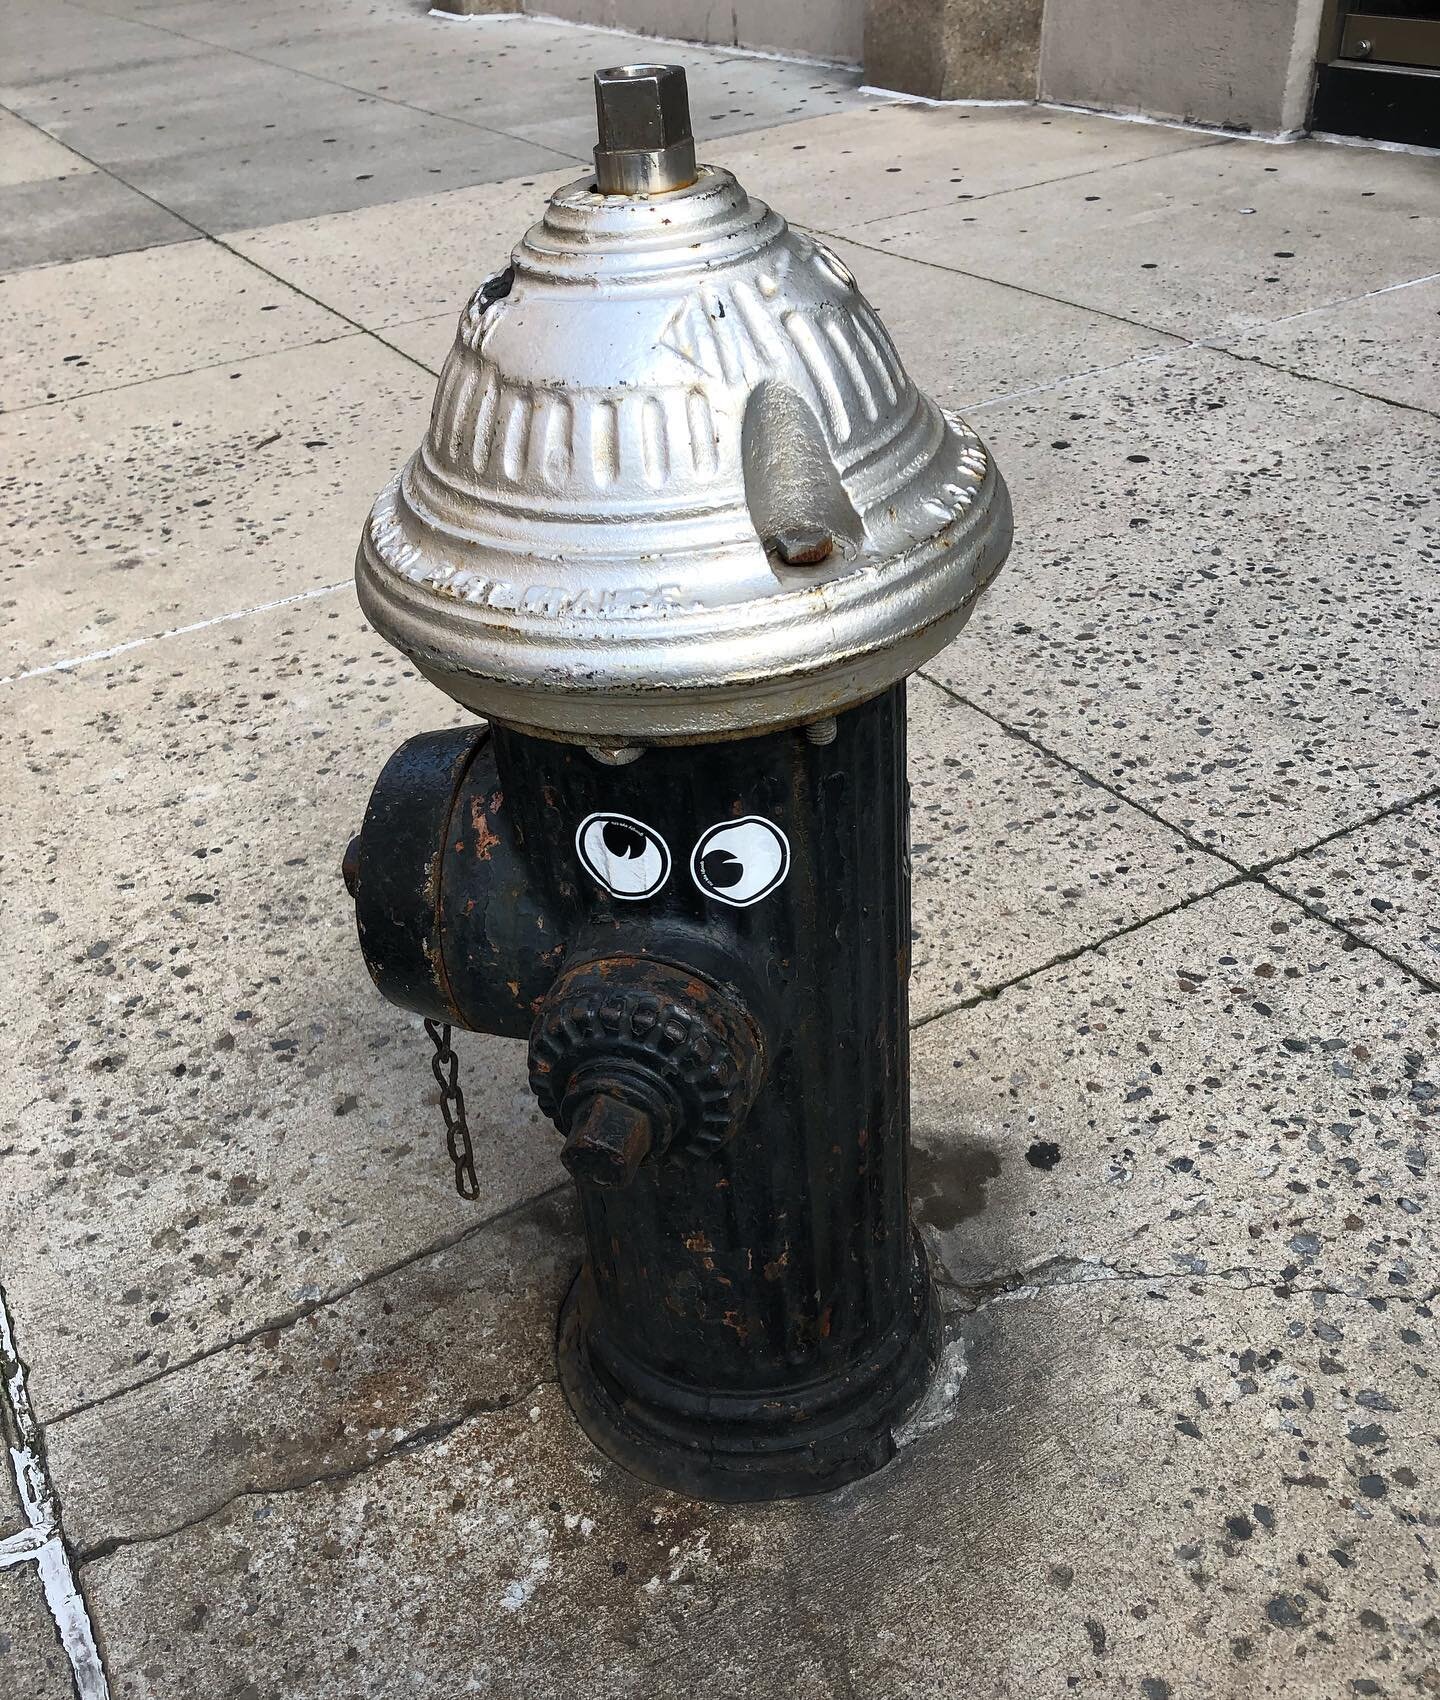 Crazy Hot in #NYC even the #firehydrant has gone nuts! #murrayhill #midtown #newyorker #tourguide trying to beat the heat🥵 #saturdayfun